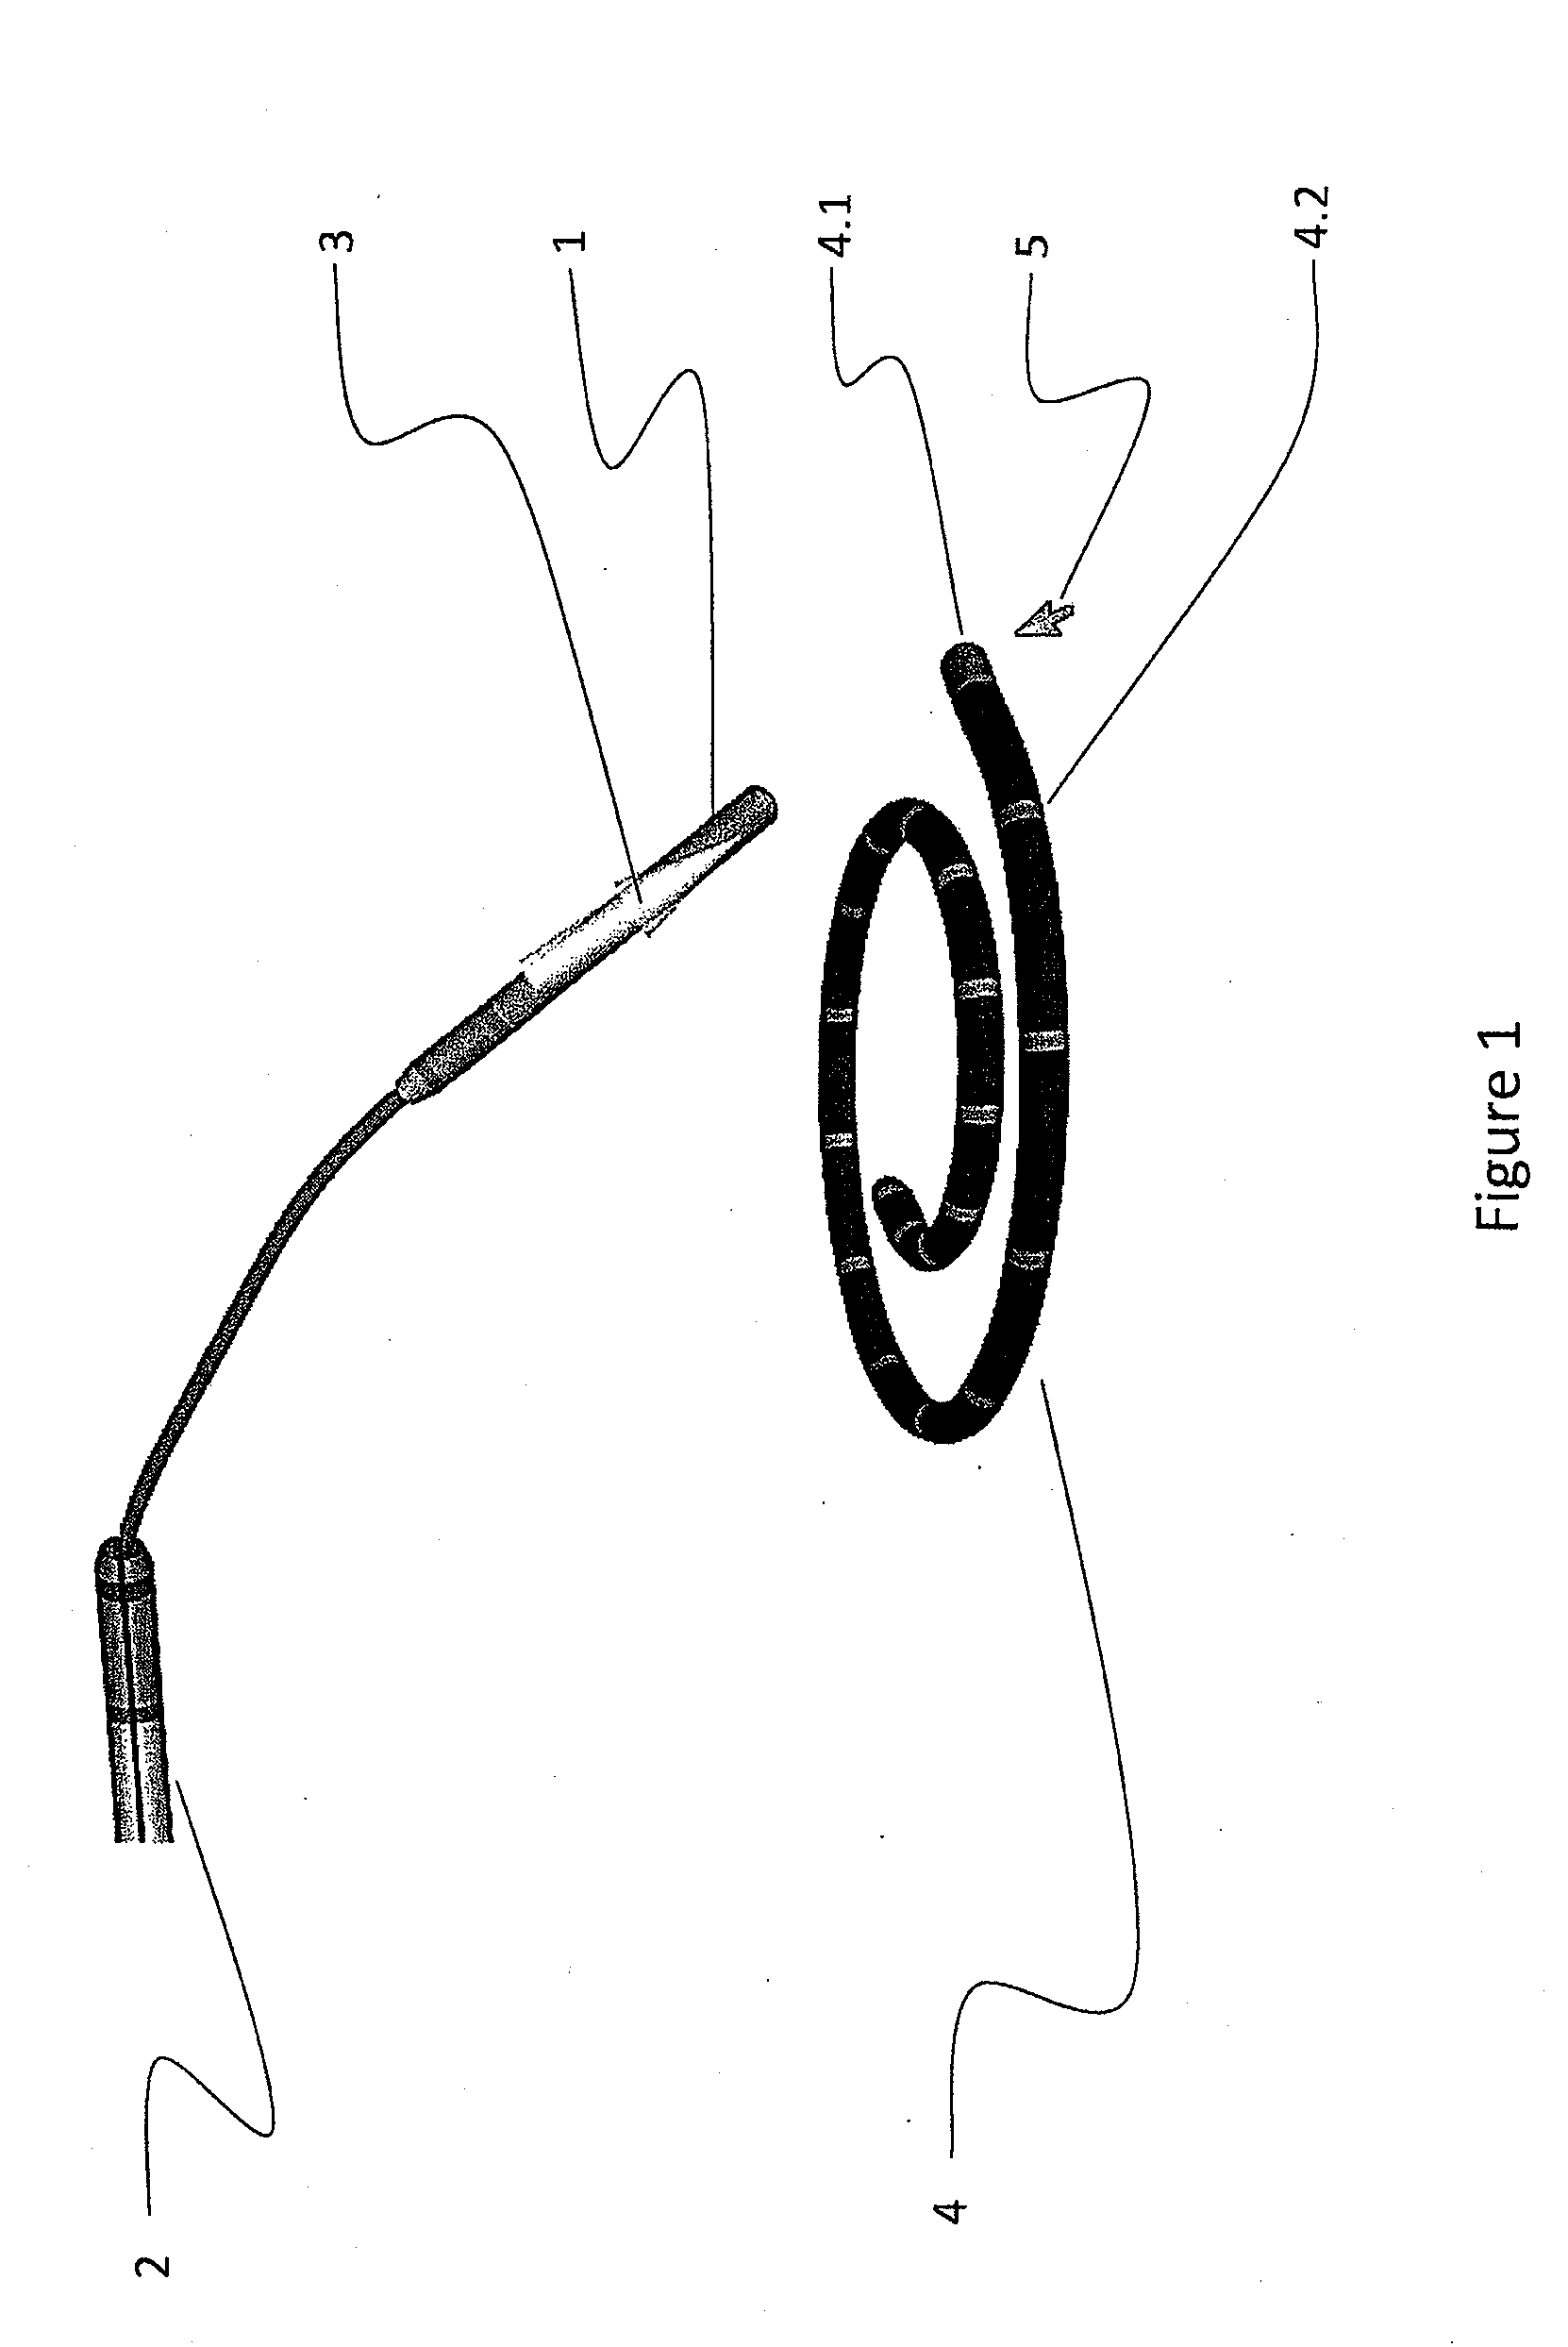 System and method for targeting catheter electrodes